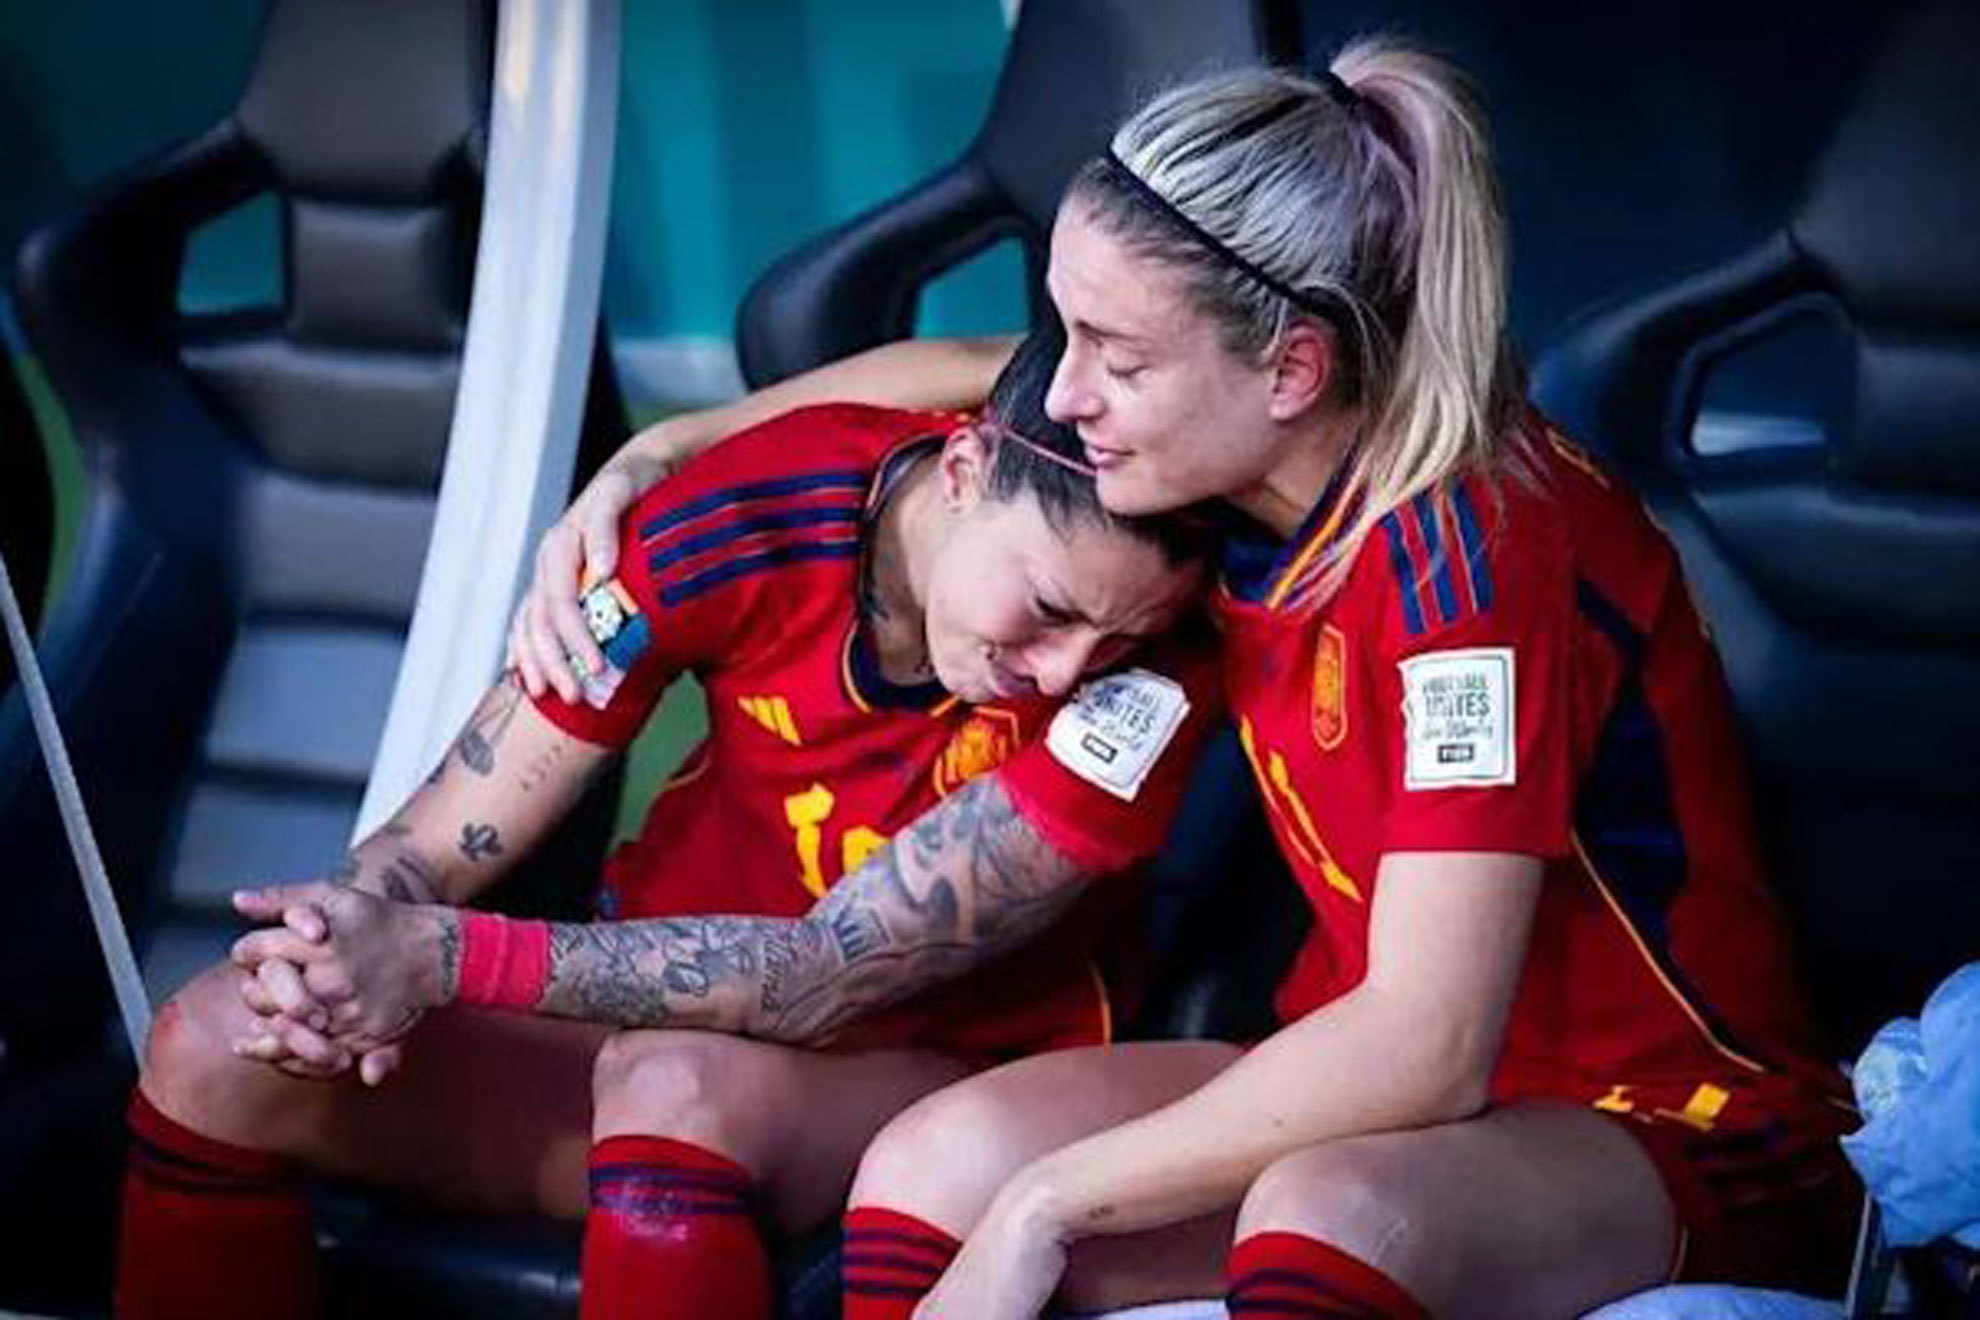 World champions call out Rubiales: This is unacceptable, it's over, together with Jenni Hermoso